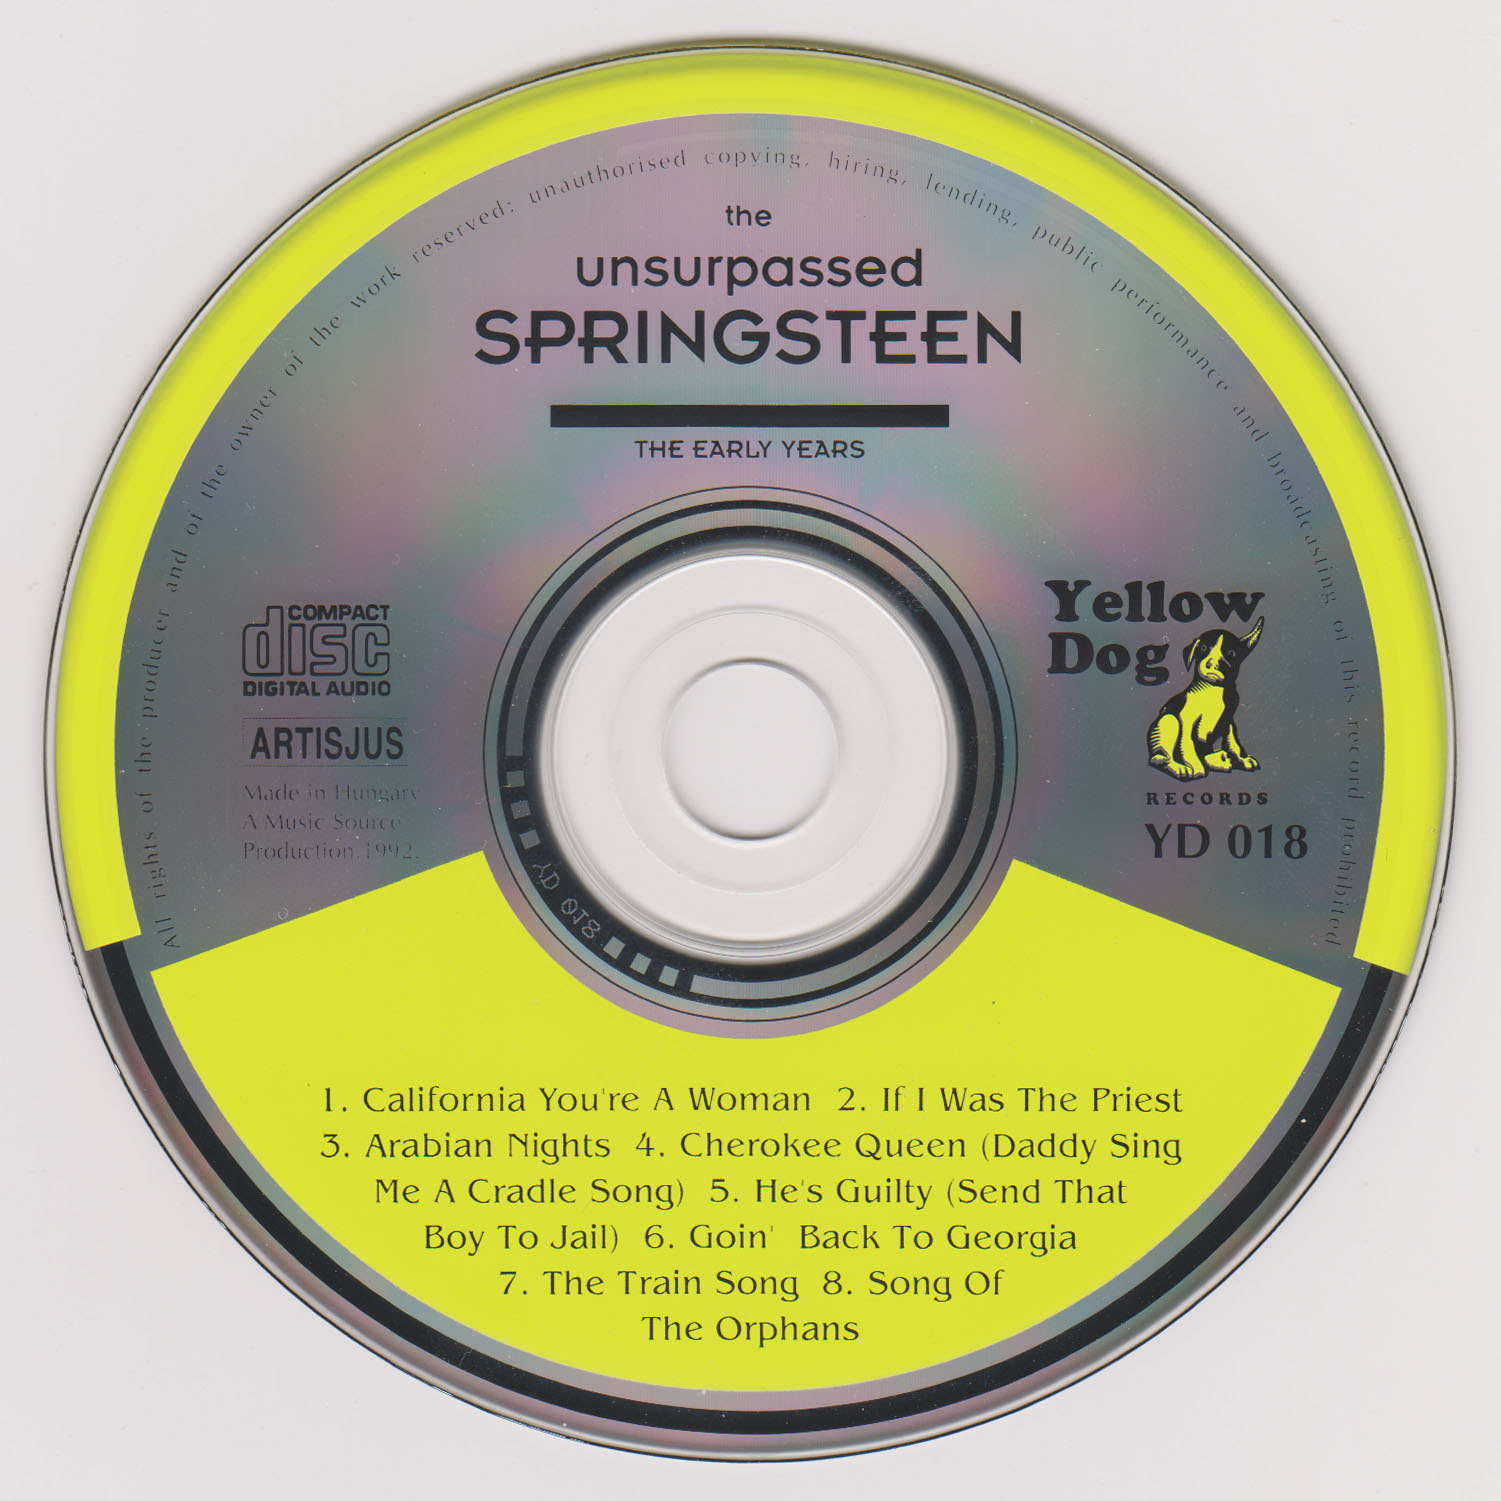 Bruce Springsteen Collection: The Unsurpassed Springsteen Volume 1